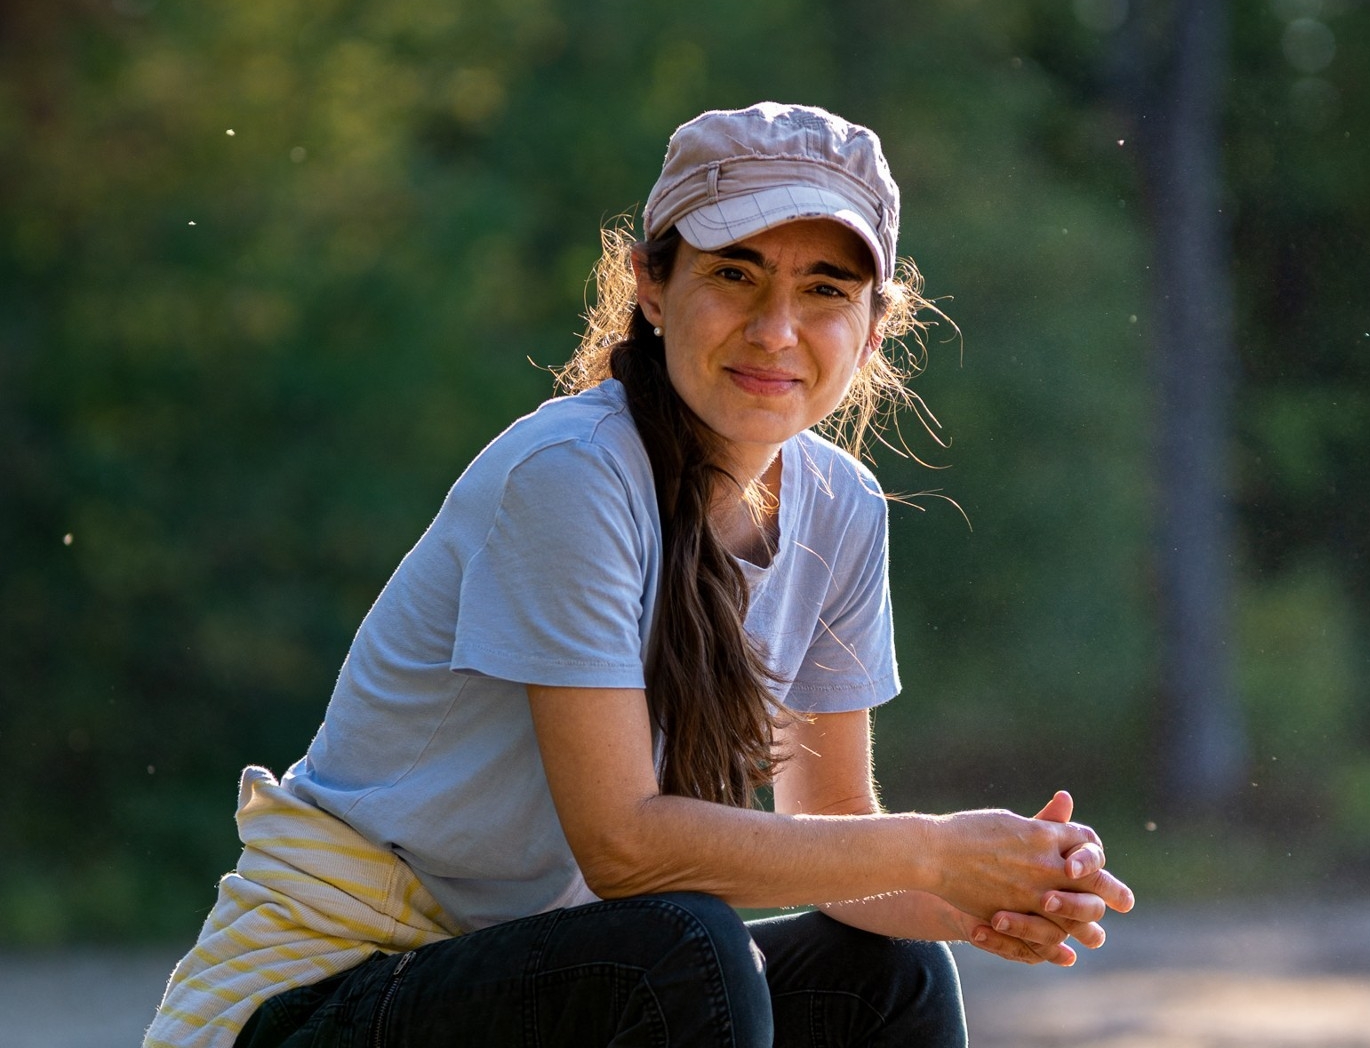 Katherine Jerkovic, crouching down, wearing jeans and a ball cap.